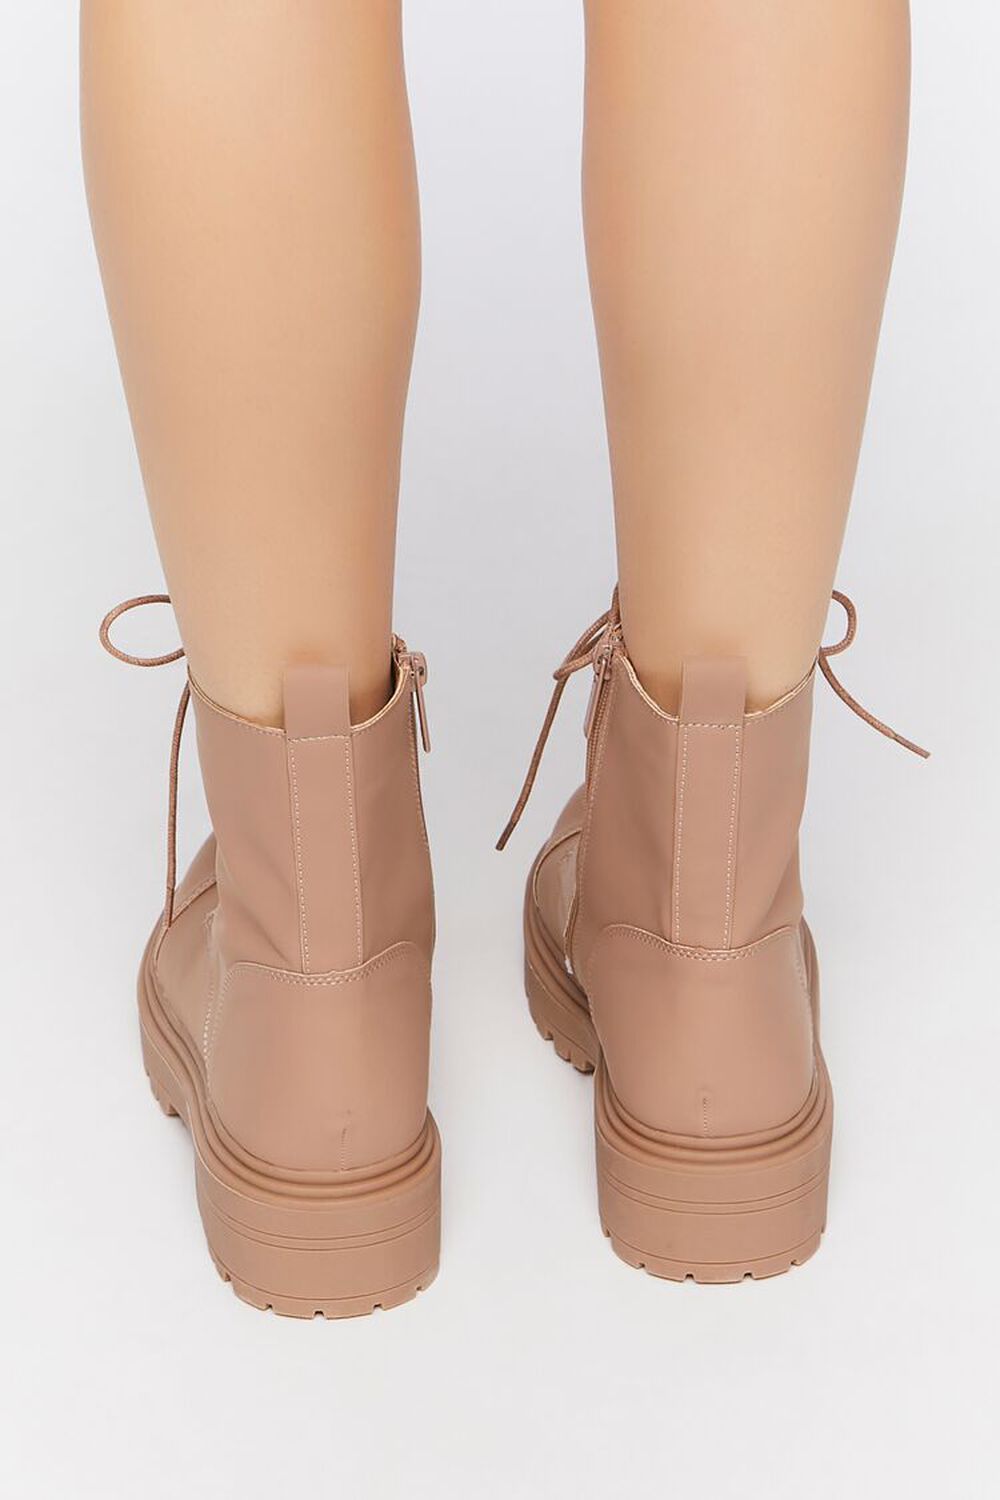 NUDE Lace-Up Faux Leather Booties, image 3